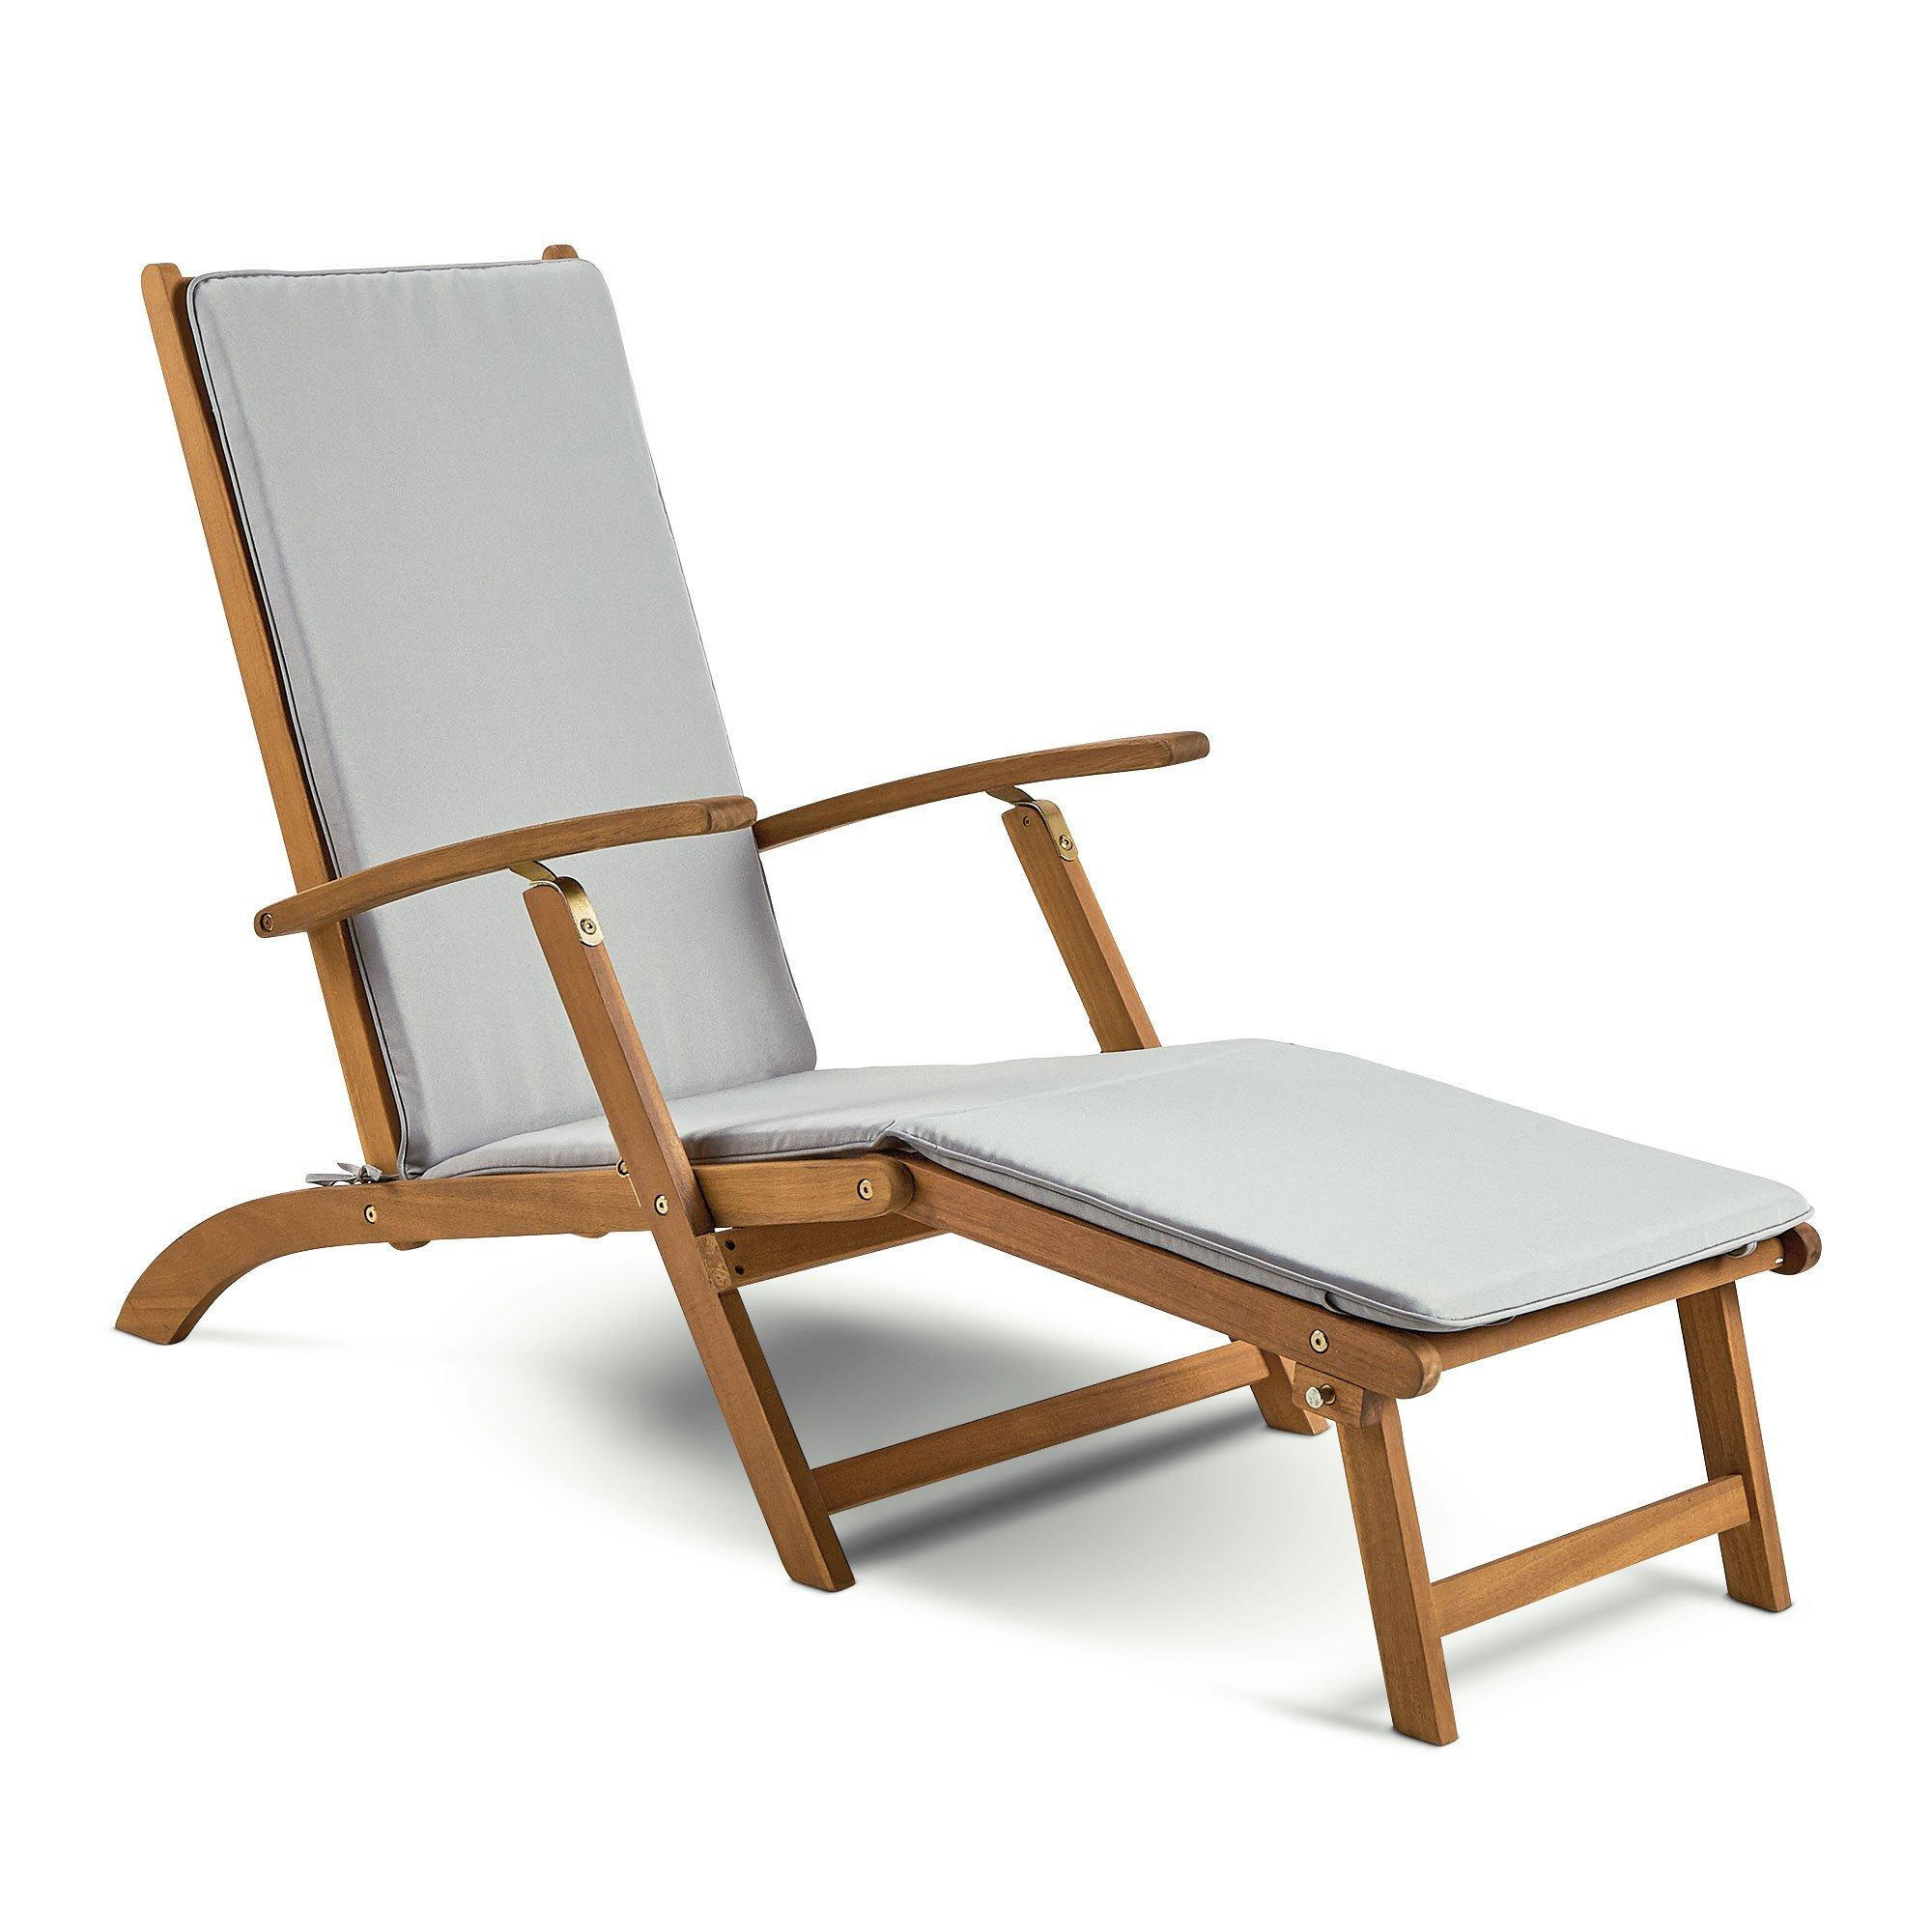 Wooden Folding Reclining Garden Sun Lounger and Removable Footstool - image 1